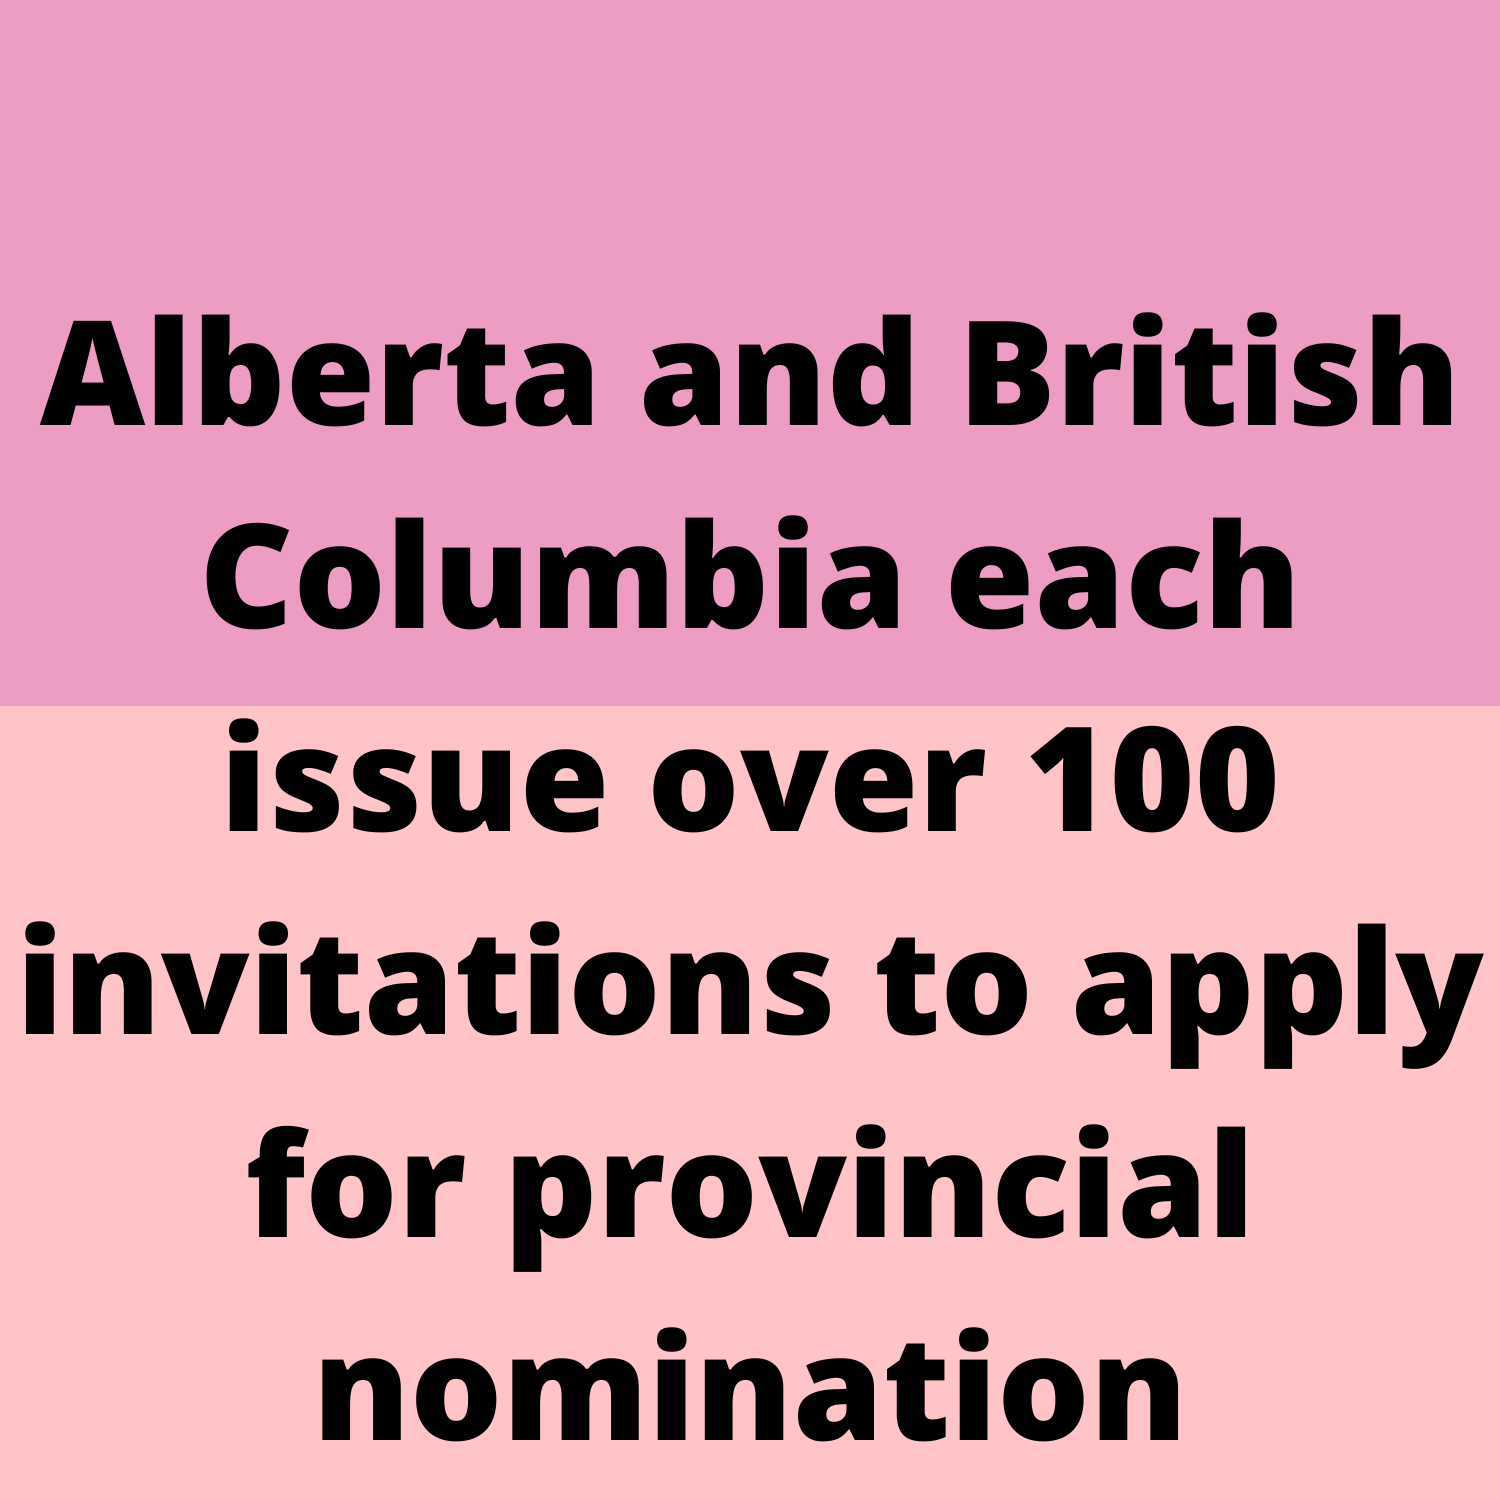 Alberta and British Columbia each issue over 100 invitations to apply for provincial nomination